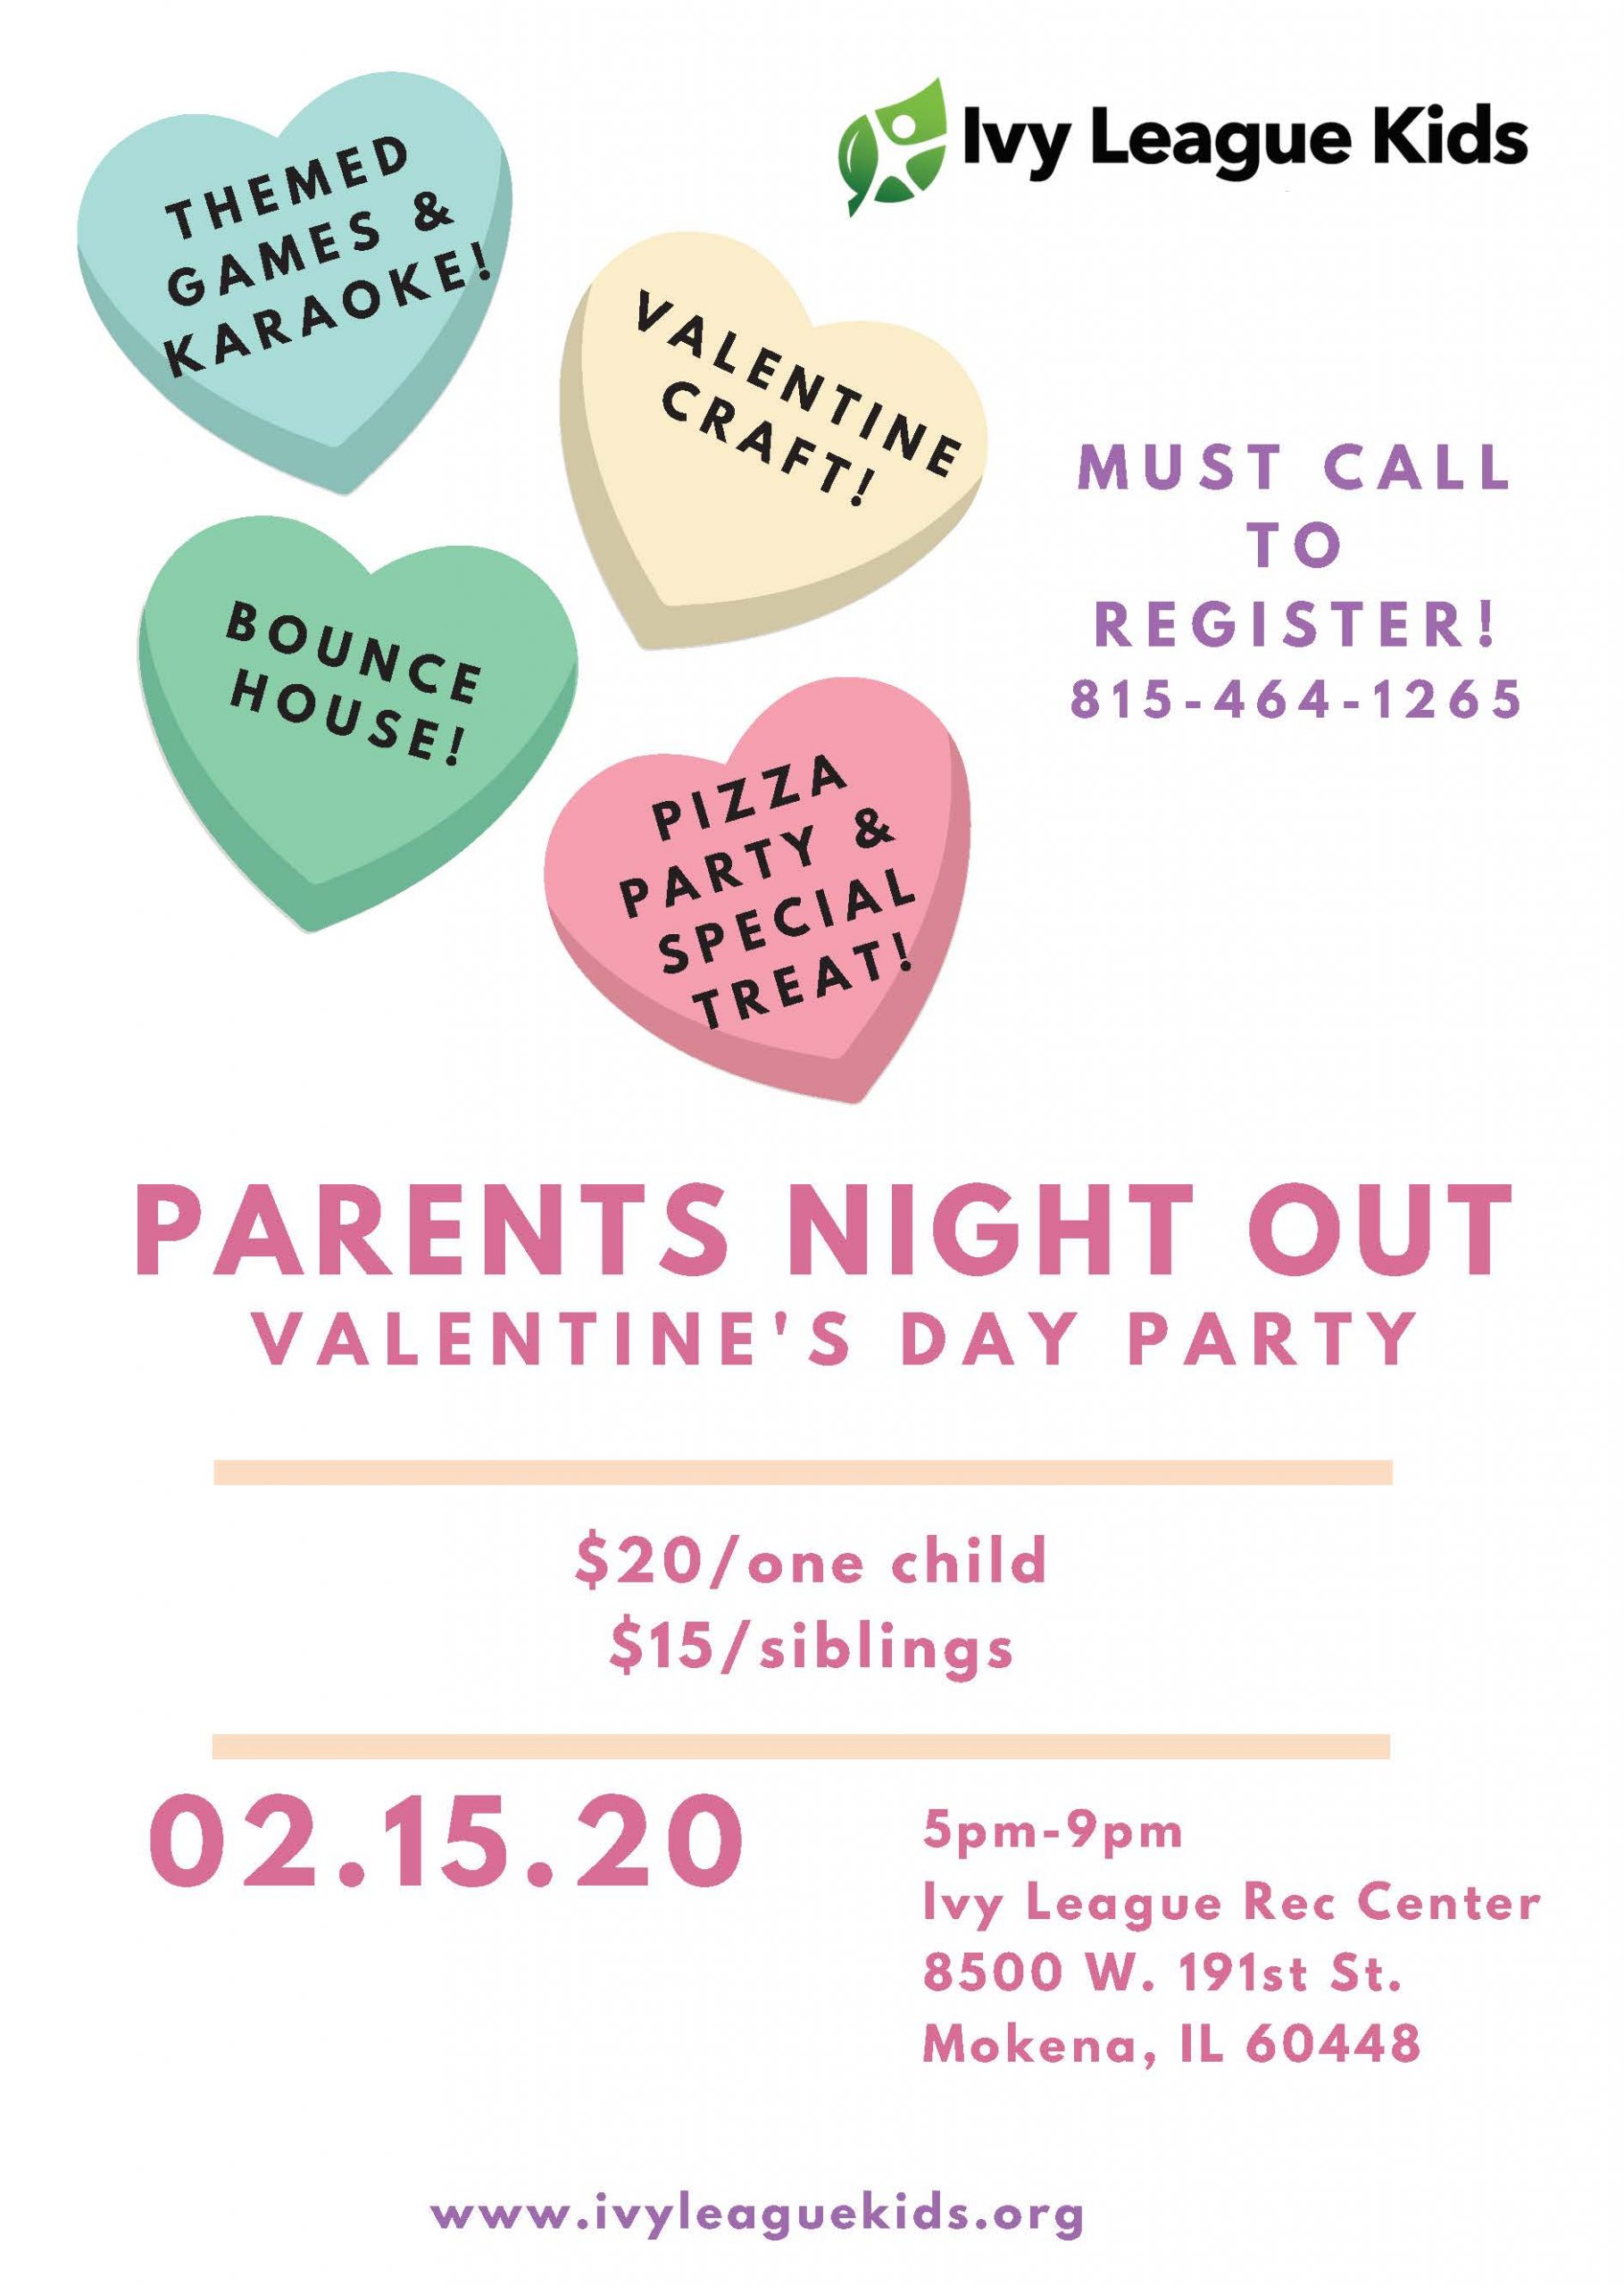 valentine's day party flyer template free, valentine's day event flyer template free, valentine's day event poster template, valentine's day party flyer for kids, valentine's day flyer template free, valentines flyers printable, valentines day poster ideas, valentine's poster template